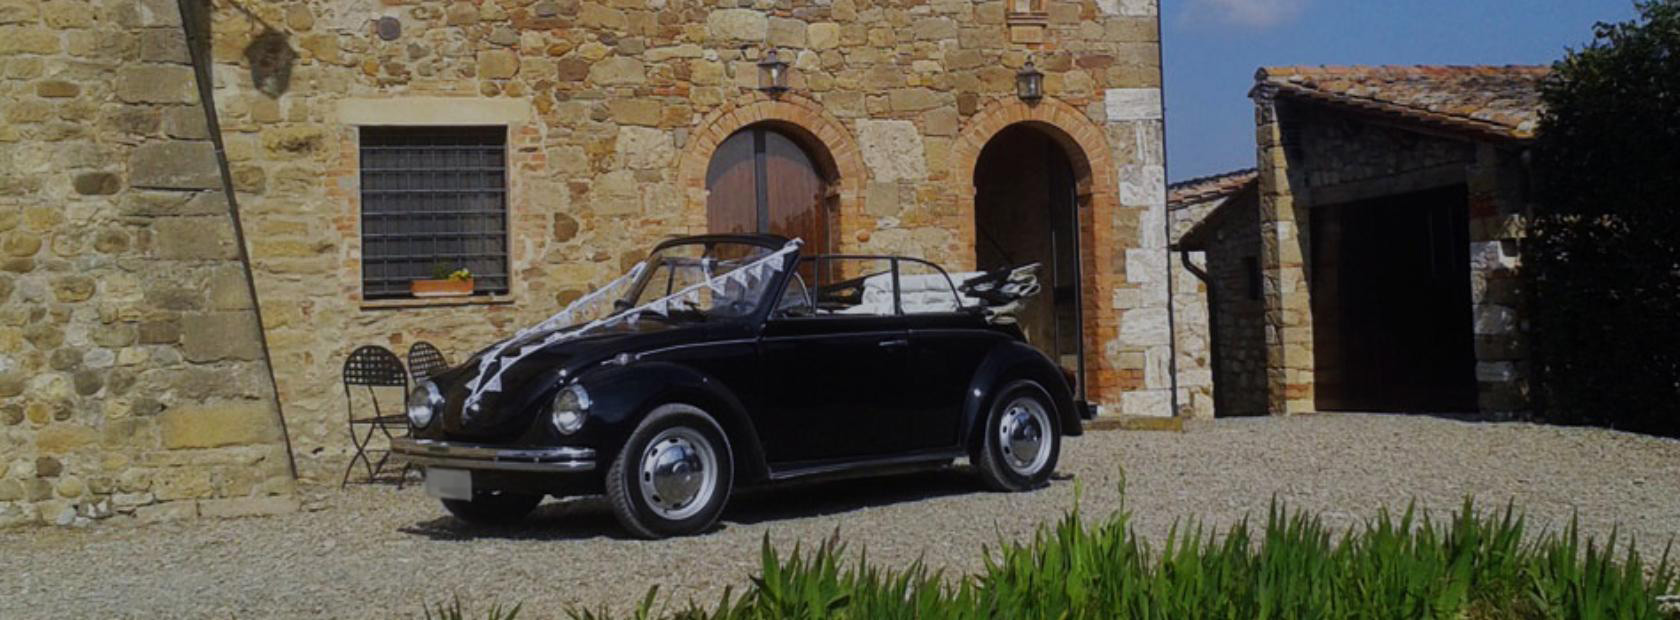 Beetle cabriolet rental for weddings and tours in Tuscany and Umbria